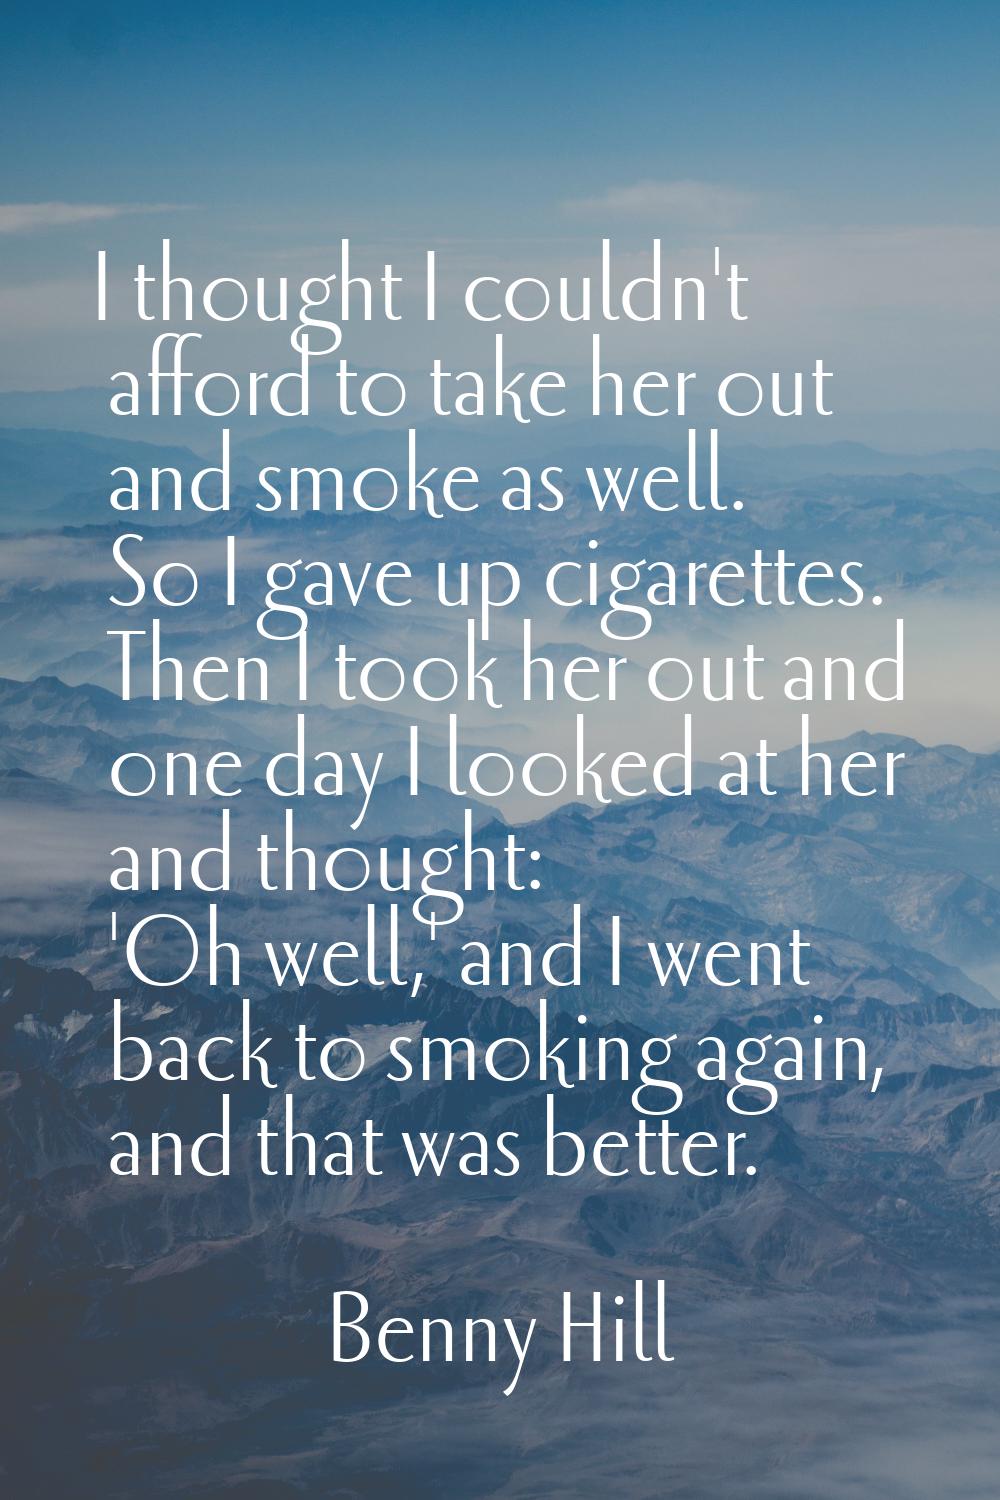 I thought I couldn't afford to take her out and smoke as well. So I gave up cigarettes. Then I took